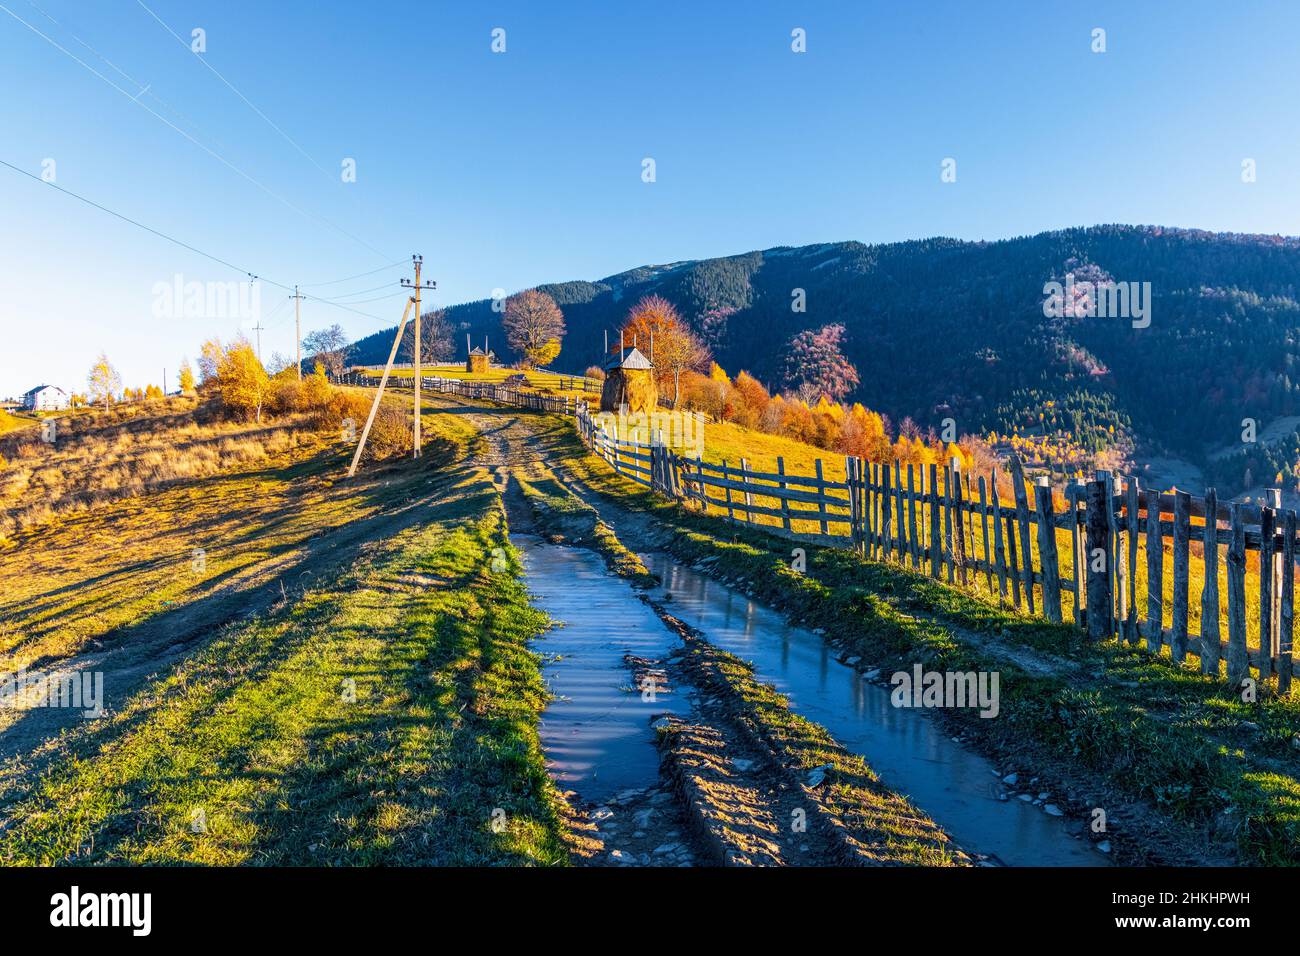 Ground road with dirty puddles after rain runs along wooden fence near highland village against forestry mountains on sunny autumn day Stock Photo